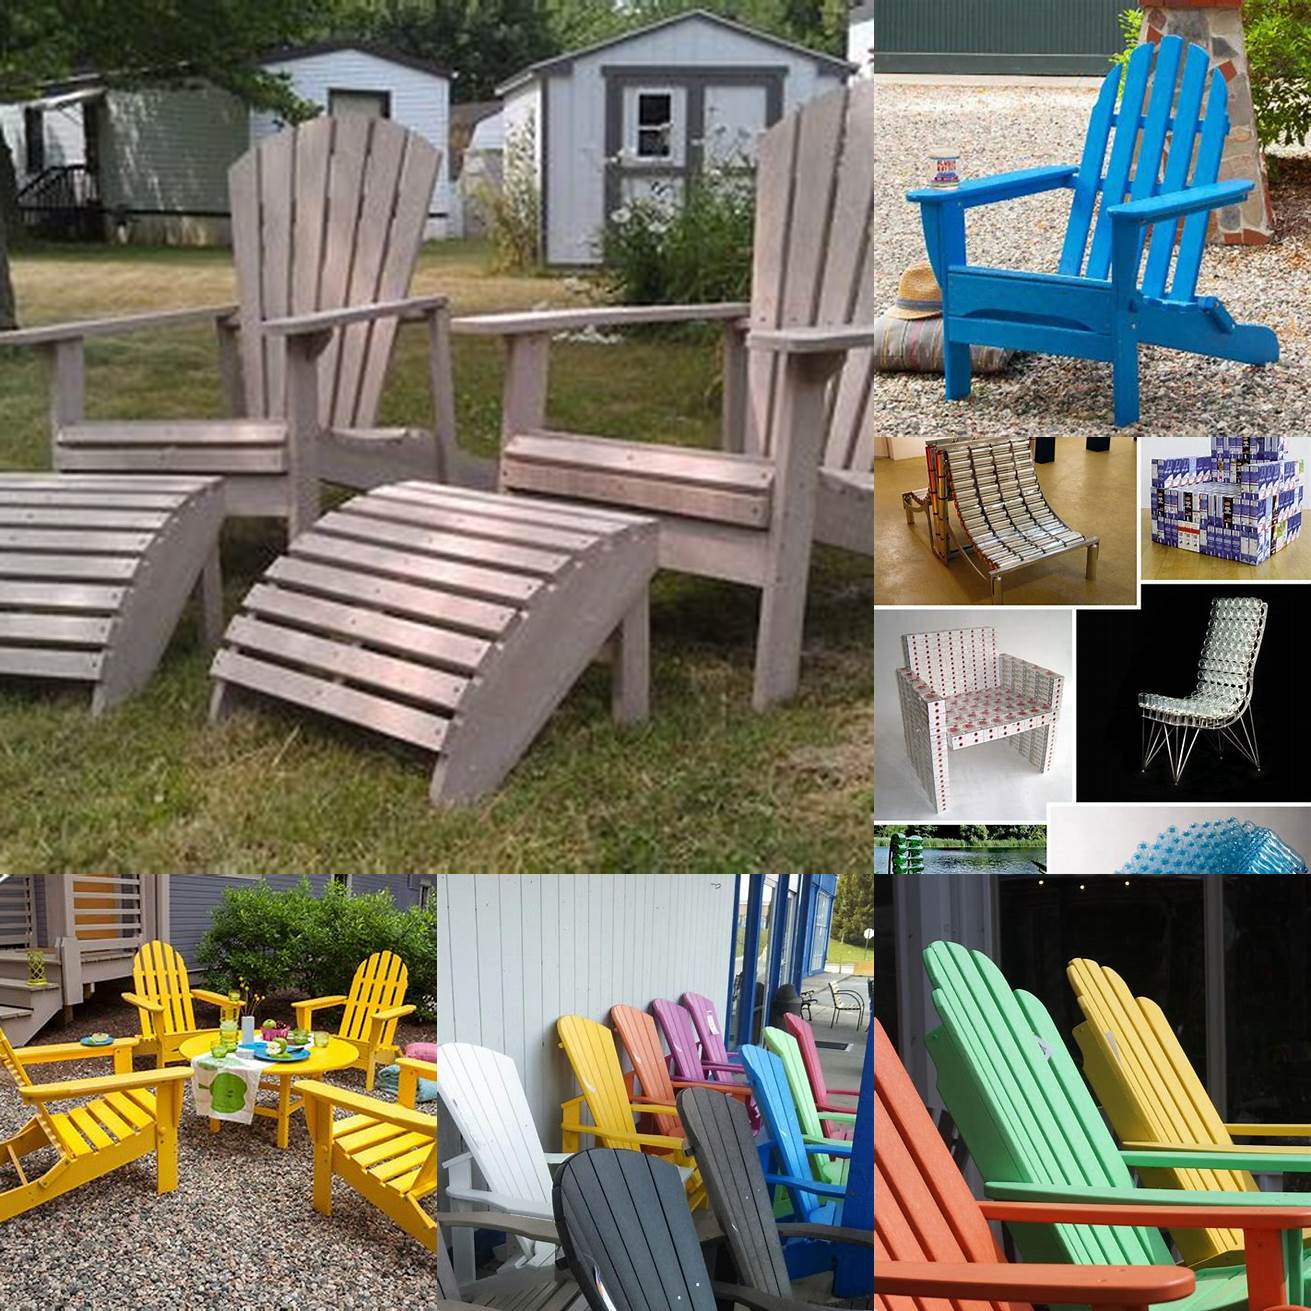 Recycled Materials - Adirondack chairs made from recycled materials such as milk jugs or plastic bottles are an eco-friendly choice Theyre often just as durable and low-maintenance as plastic chairs but with the added benefit of being environmentally conscious